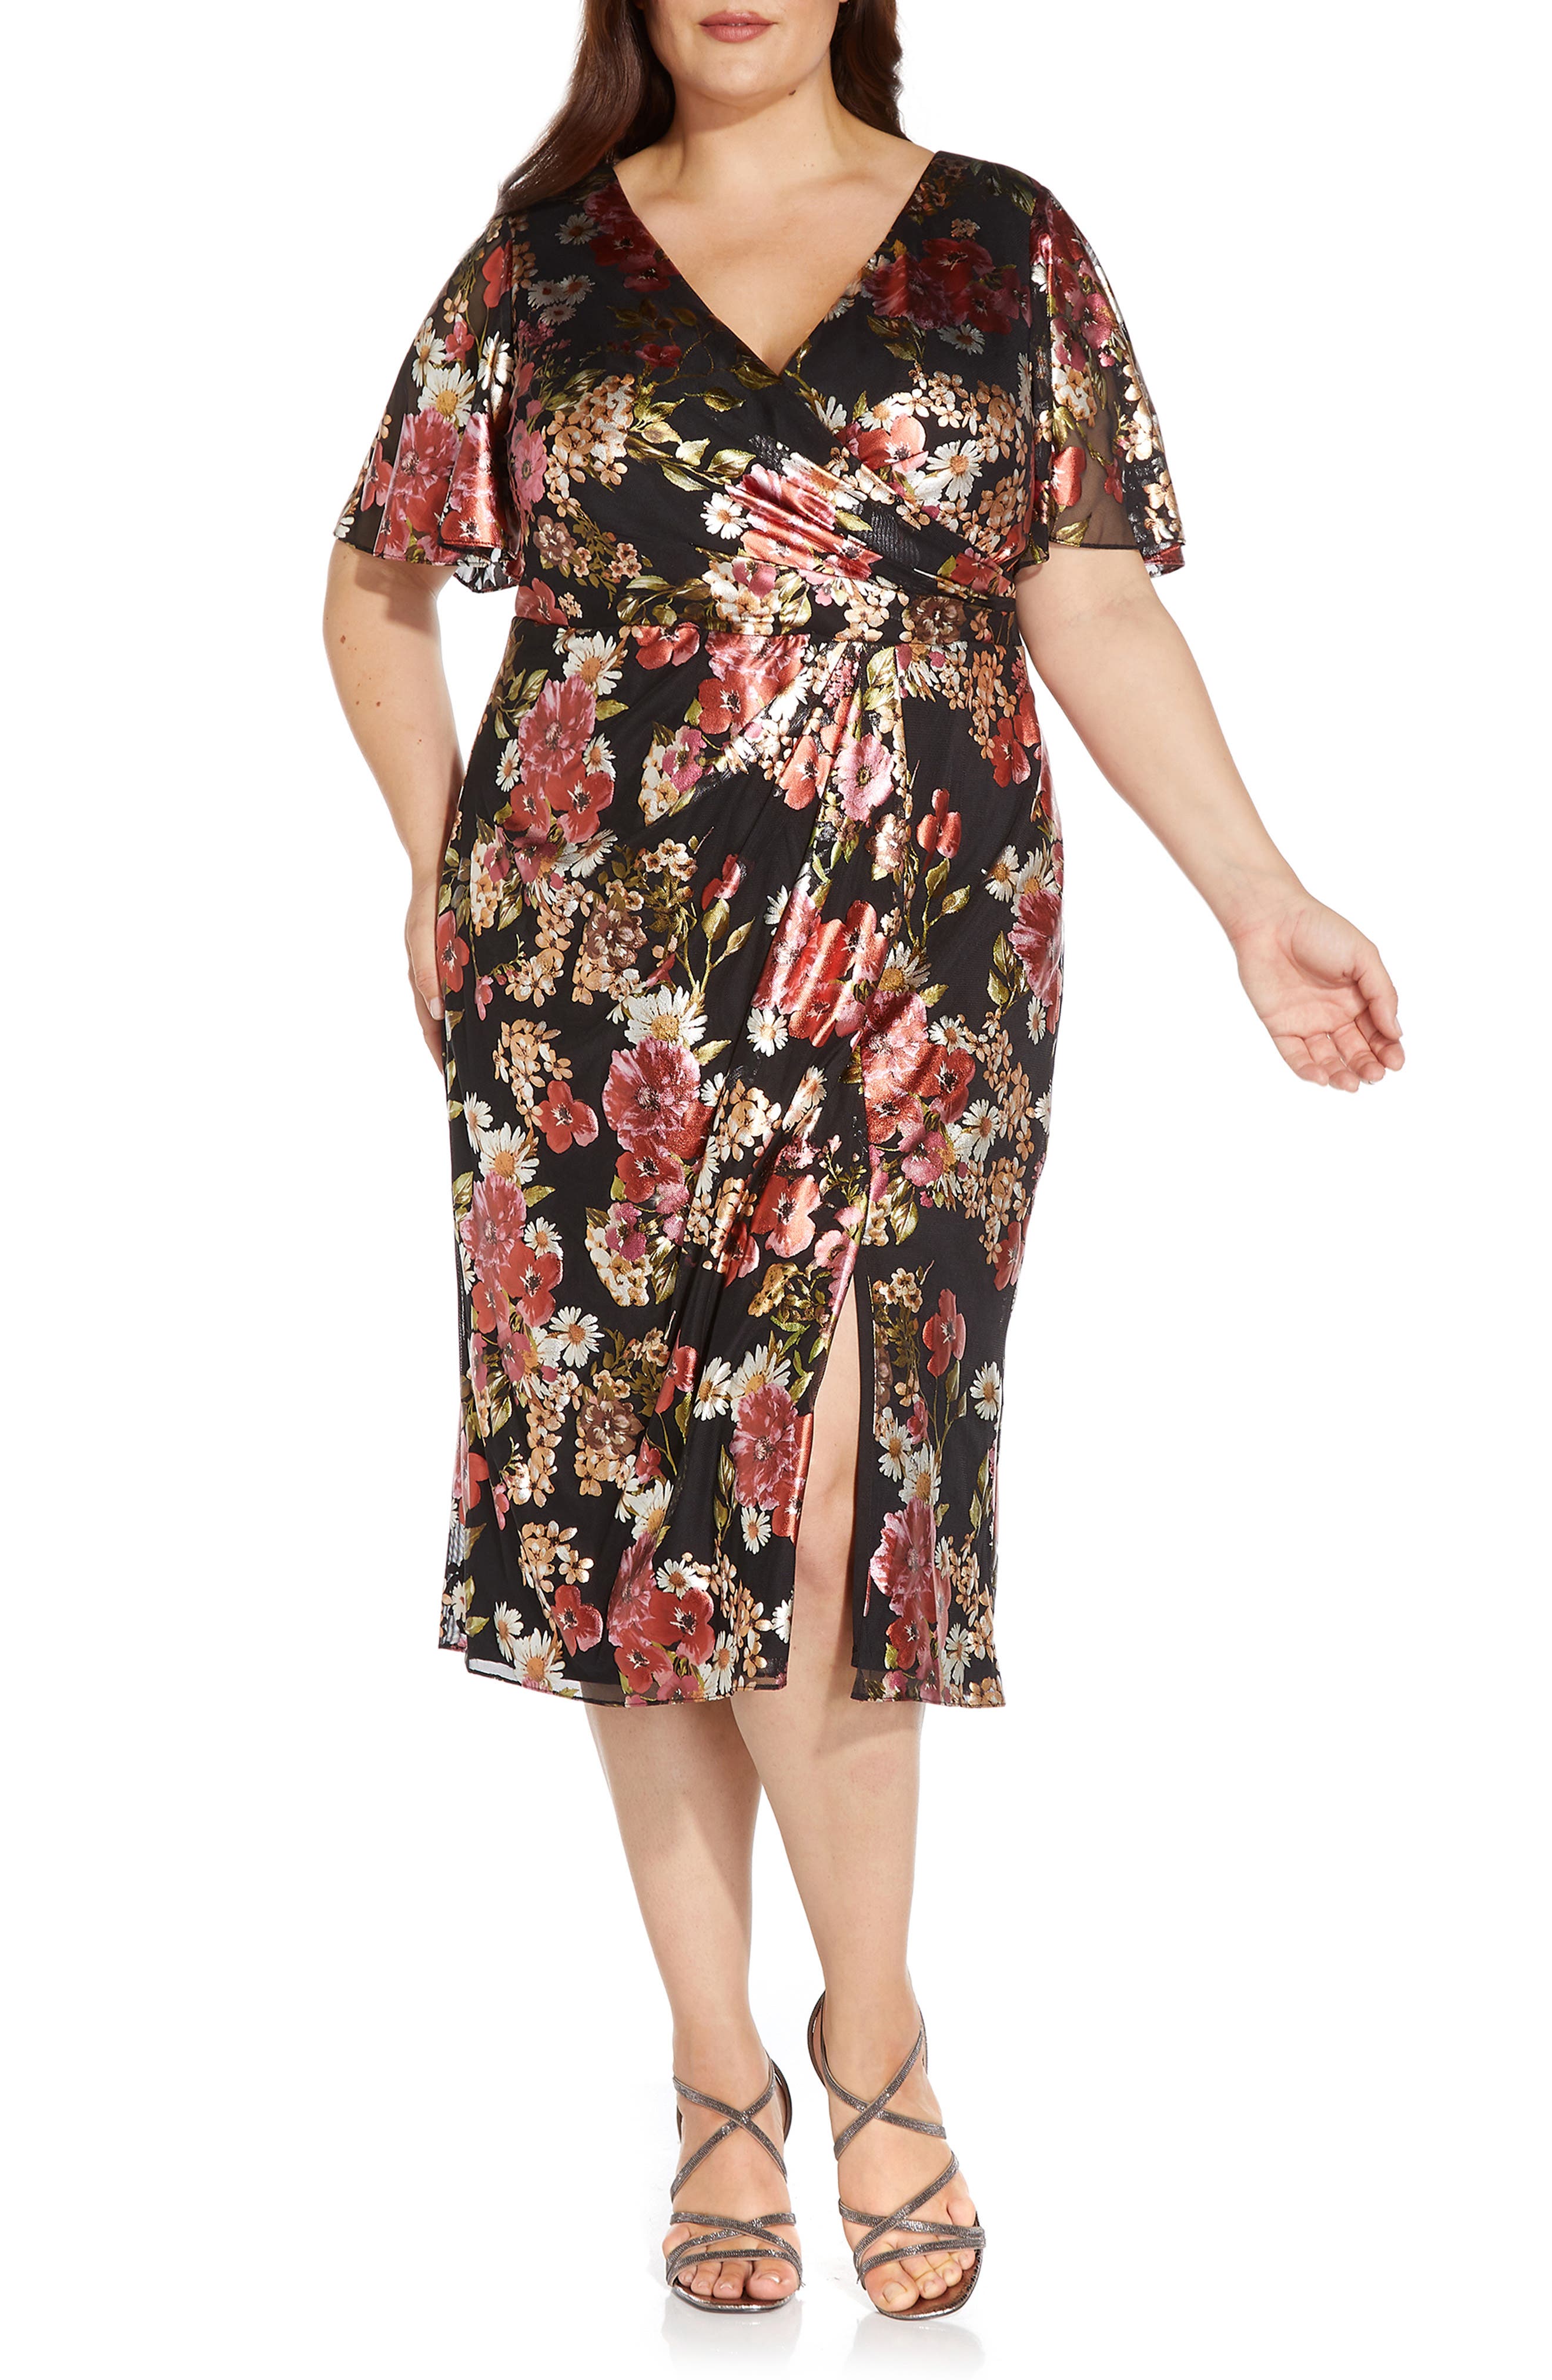 Black Multicolor NEW MSRP $160 ADRIANNA PAPELL Women's Floral Printed Dress 